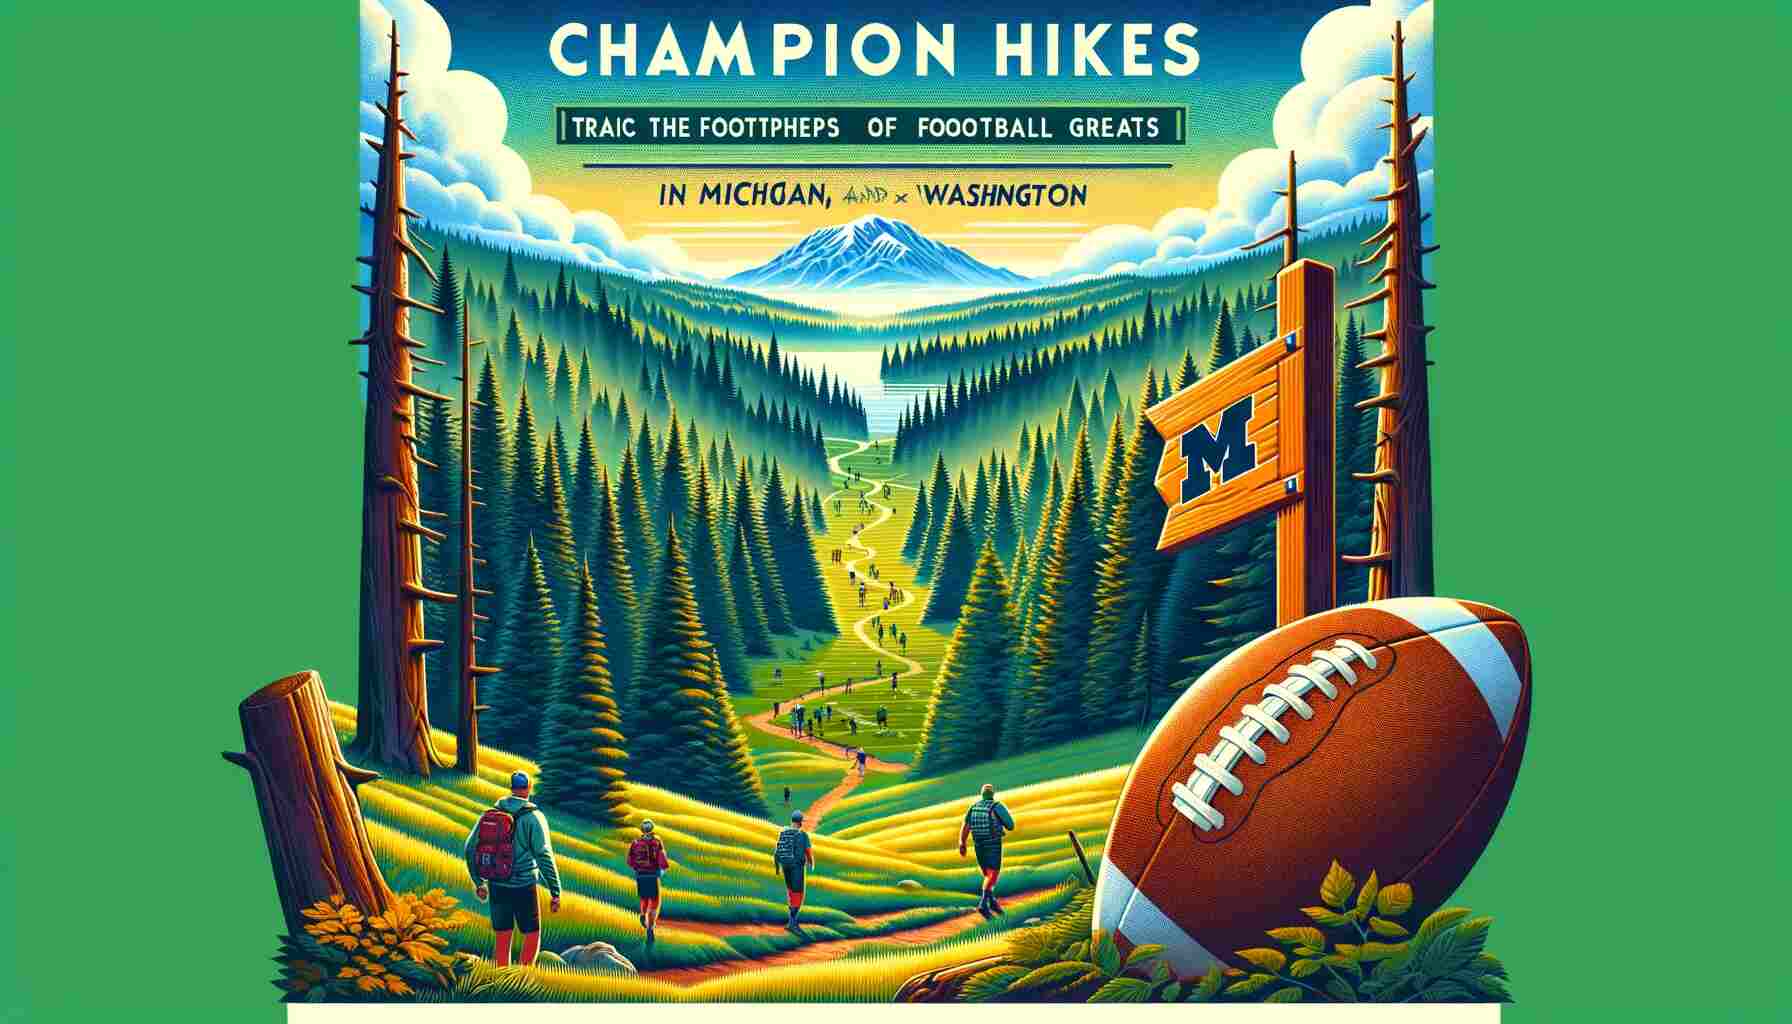 Here is the featured image for "Champion Hikes: Tracing the Footsteps of Football Greats in Michigan and Washington's Trails." This vibrant image combines the natural beauty of Michigan and Washington's landscapes with subtle football references, evoking a sense of adventure and athleticism.